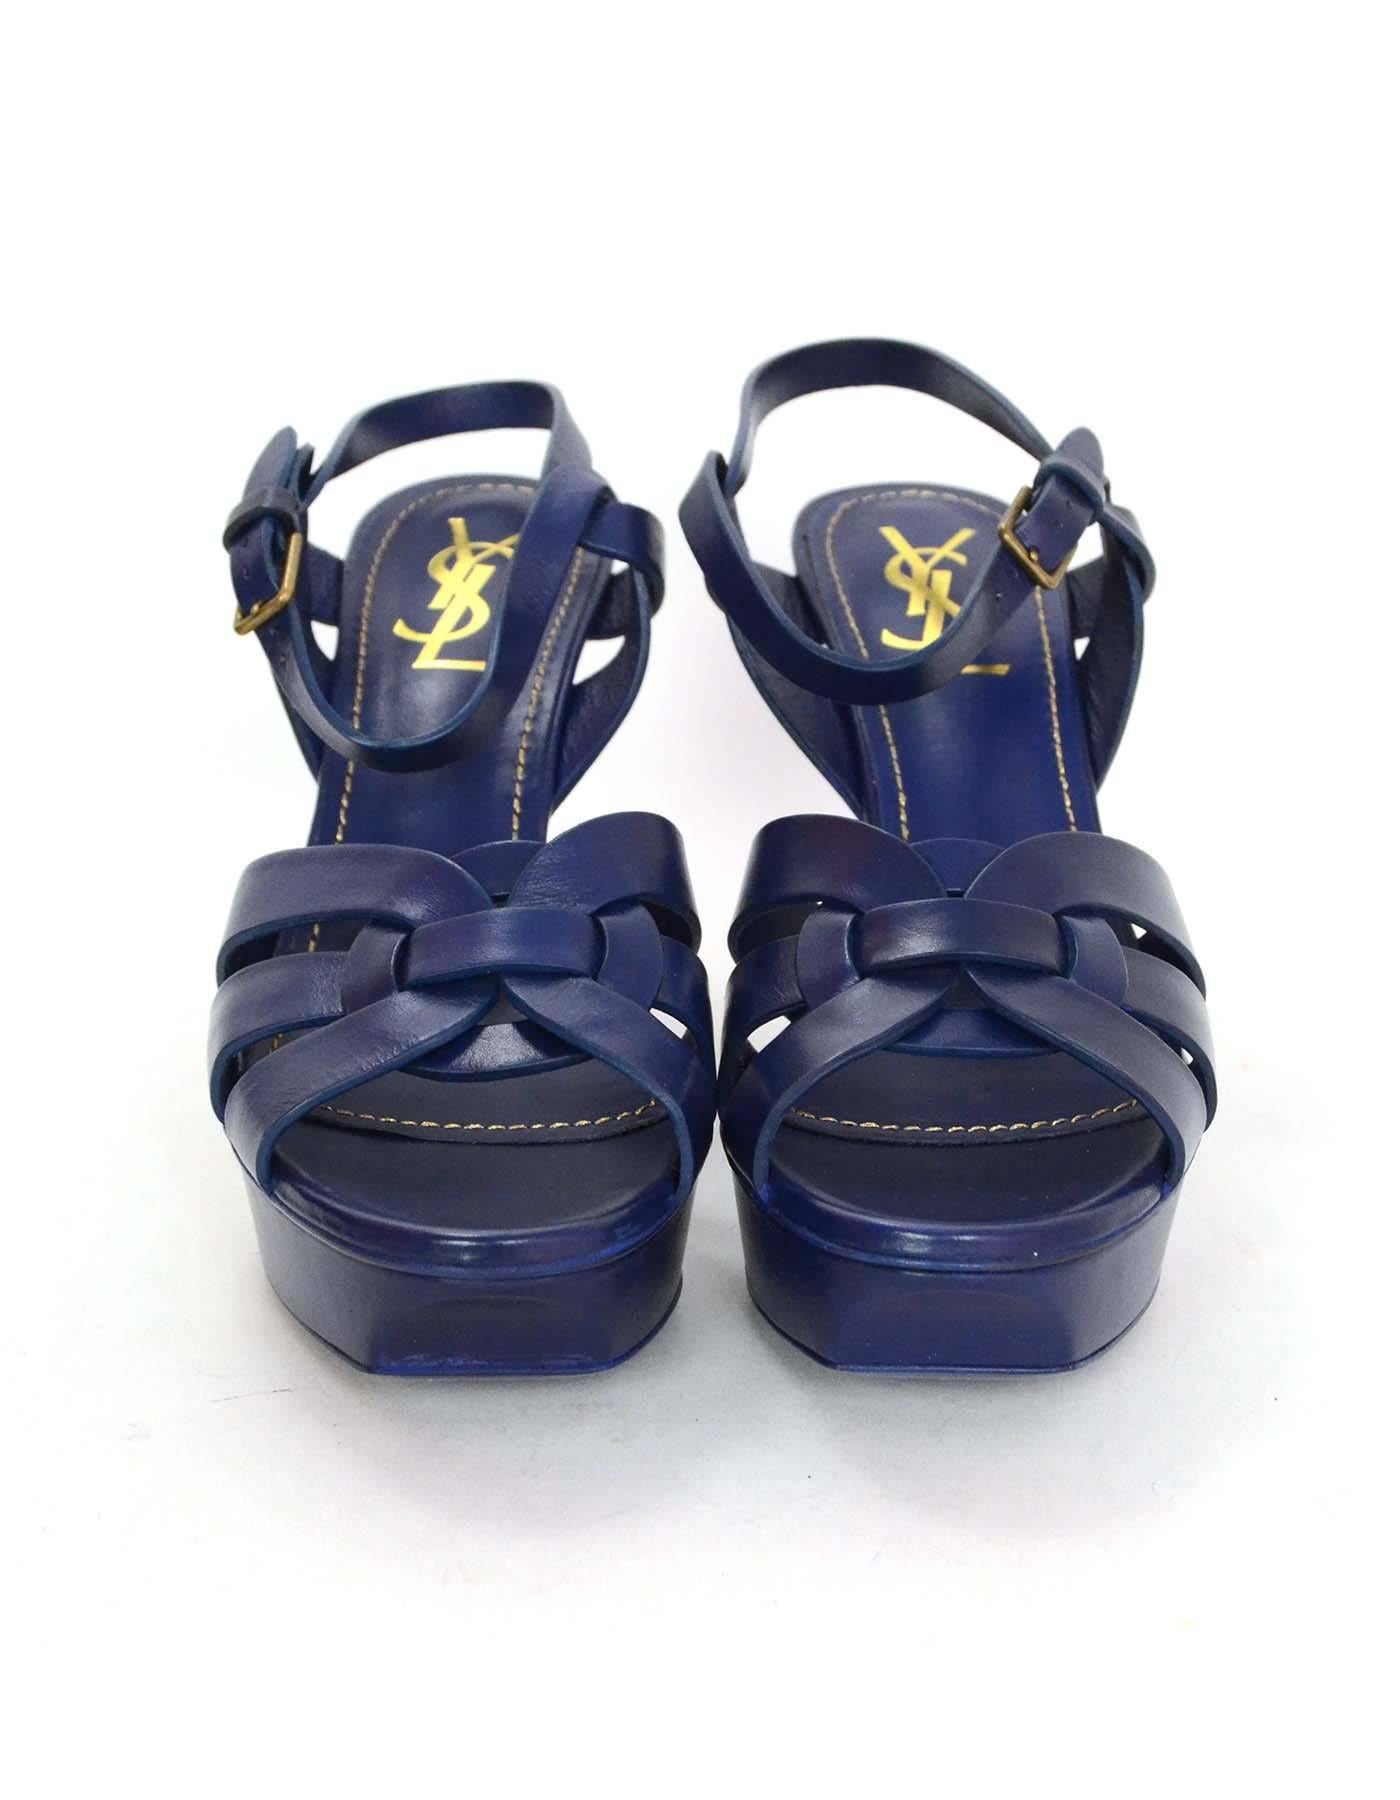 Yves Saint Laurent YSL Navy Leather Tribute 75 Strappy Sandals sz 